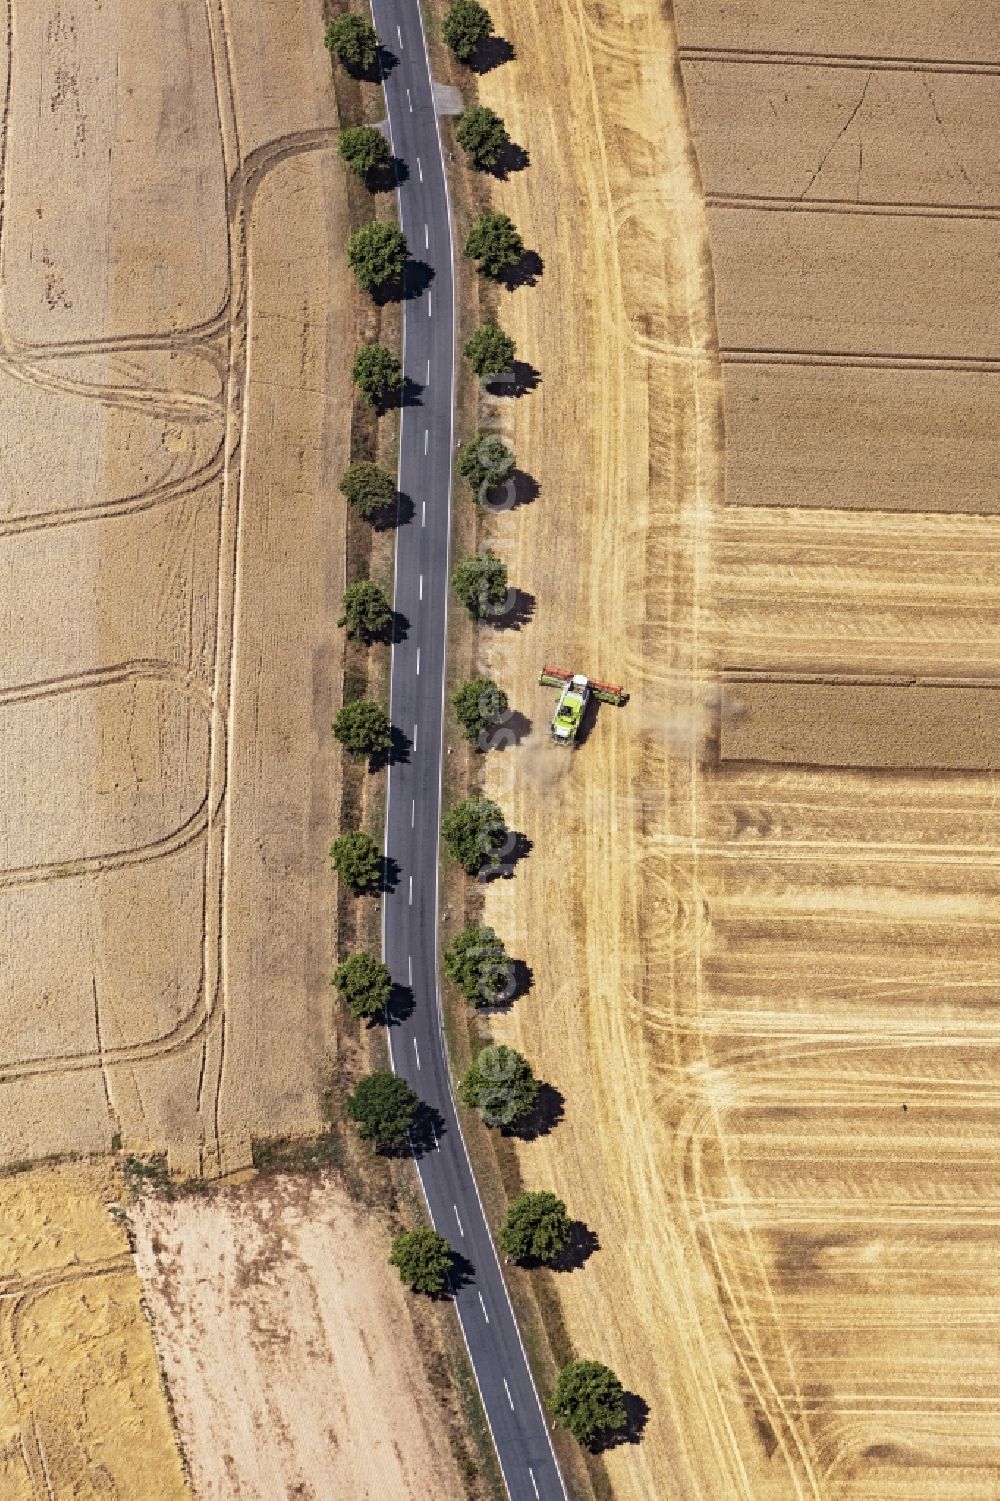 Bad Düben from the bird's eye view: Harvest use of heavy agricultural machinery - combine harvesters and harvesting vehicles on agricultural fields in Bad Dueben in the state Saxony, Germany